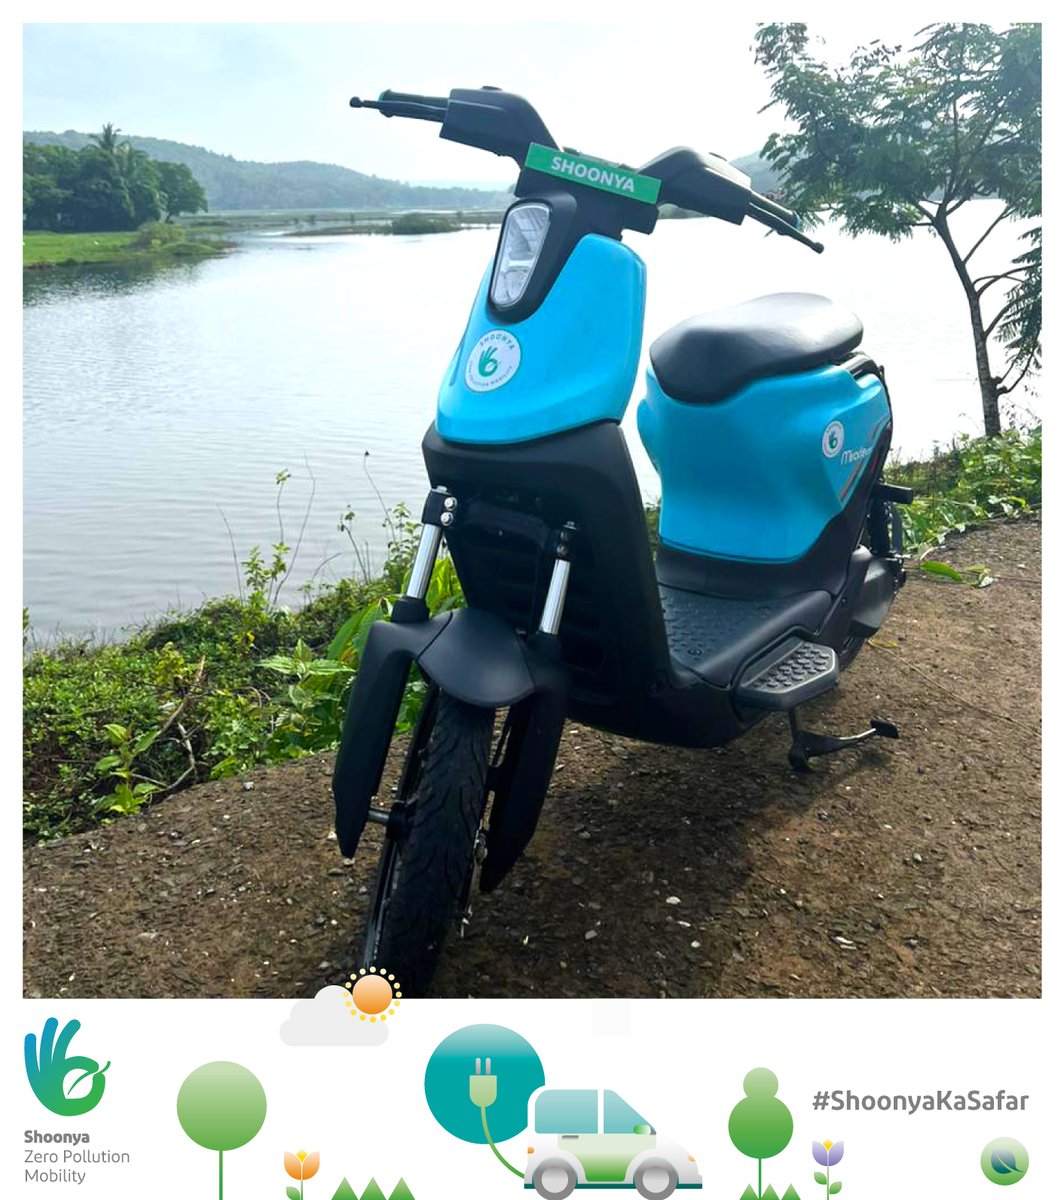 Lights, Camera, EV-olution! Shoonya's 2nd brand film is on the roll amidst Goa's stunning backdrop. Stay tuned... #ShoonyaKaSafar #CleanMobility